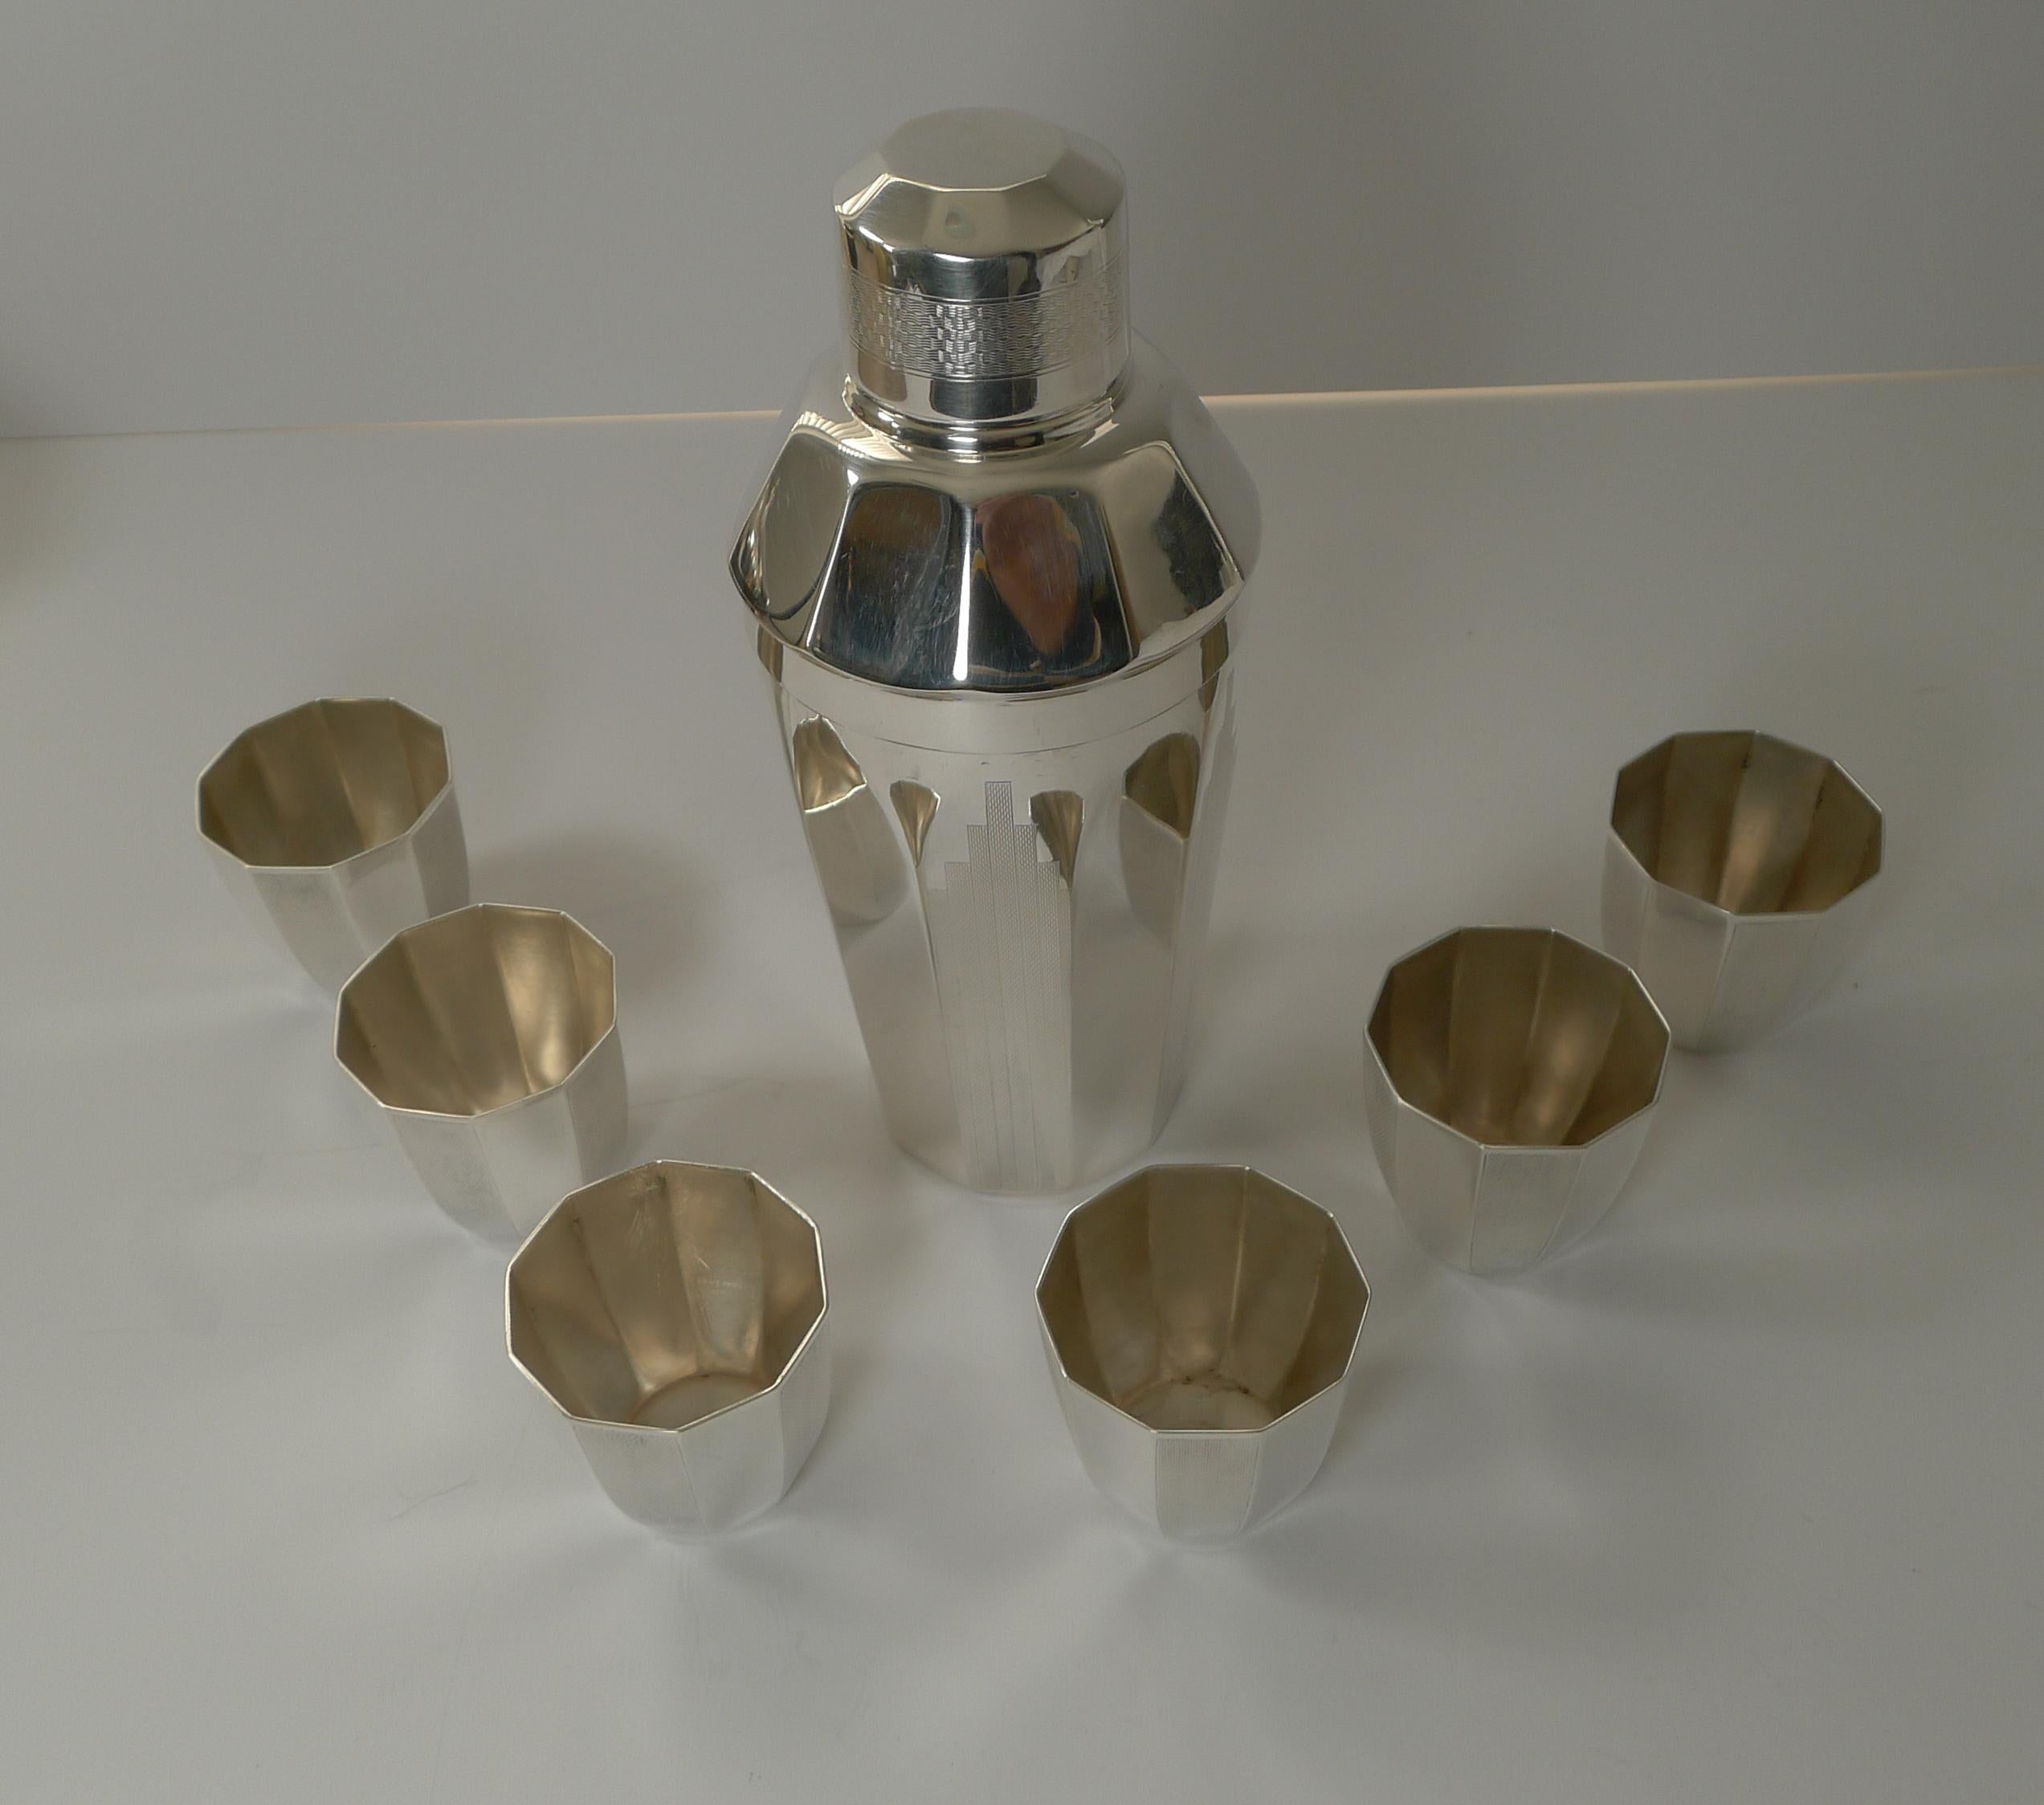 English Art Deco Silver Plated Cocktail Shaker / Set by Elkington & Co. 1